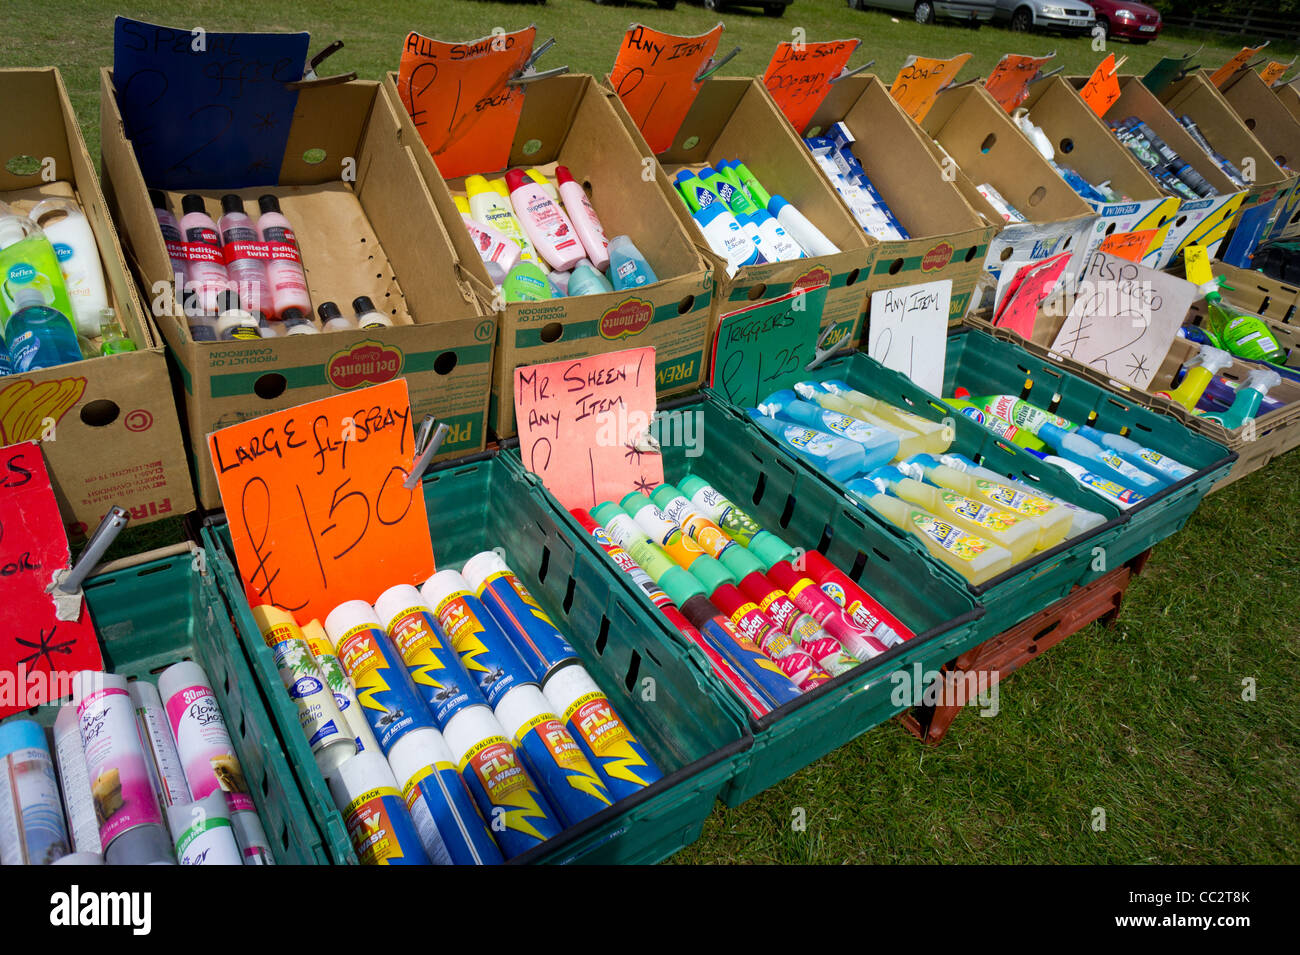 Cleaning products for sale at car boot market Stock Photo